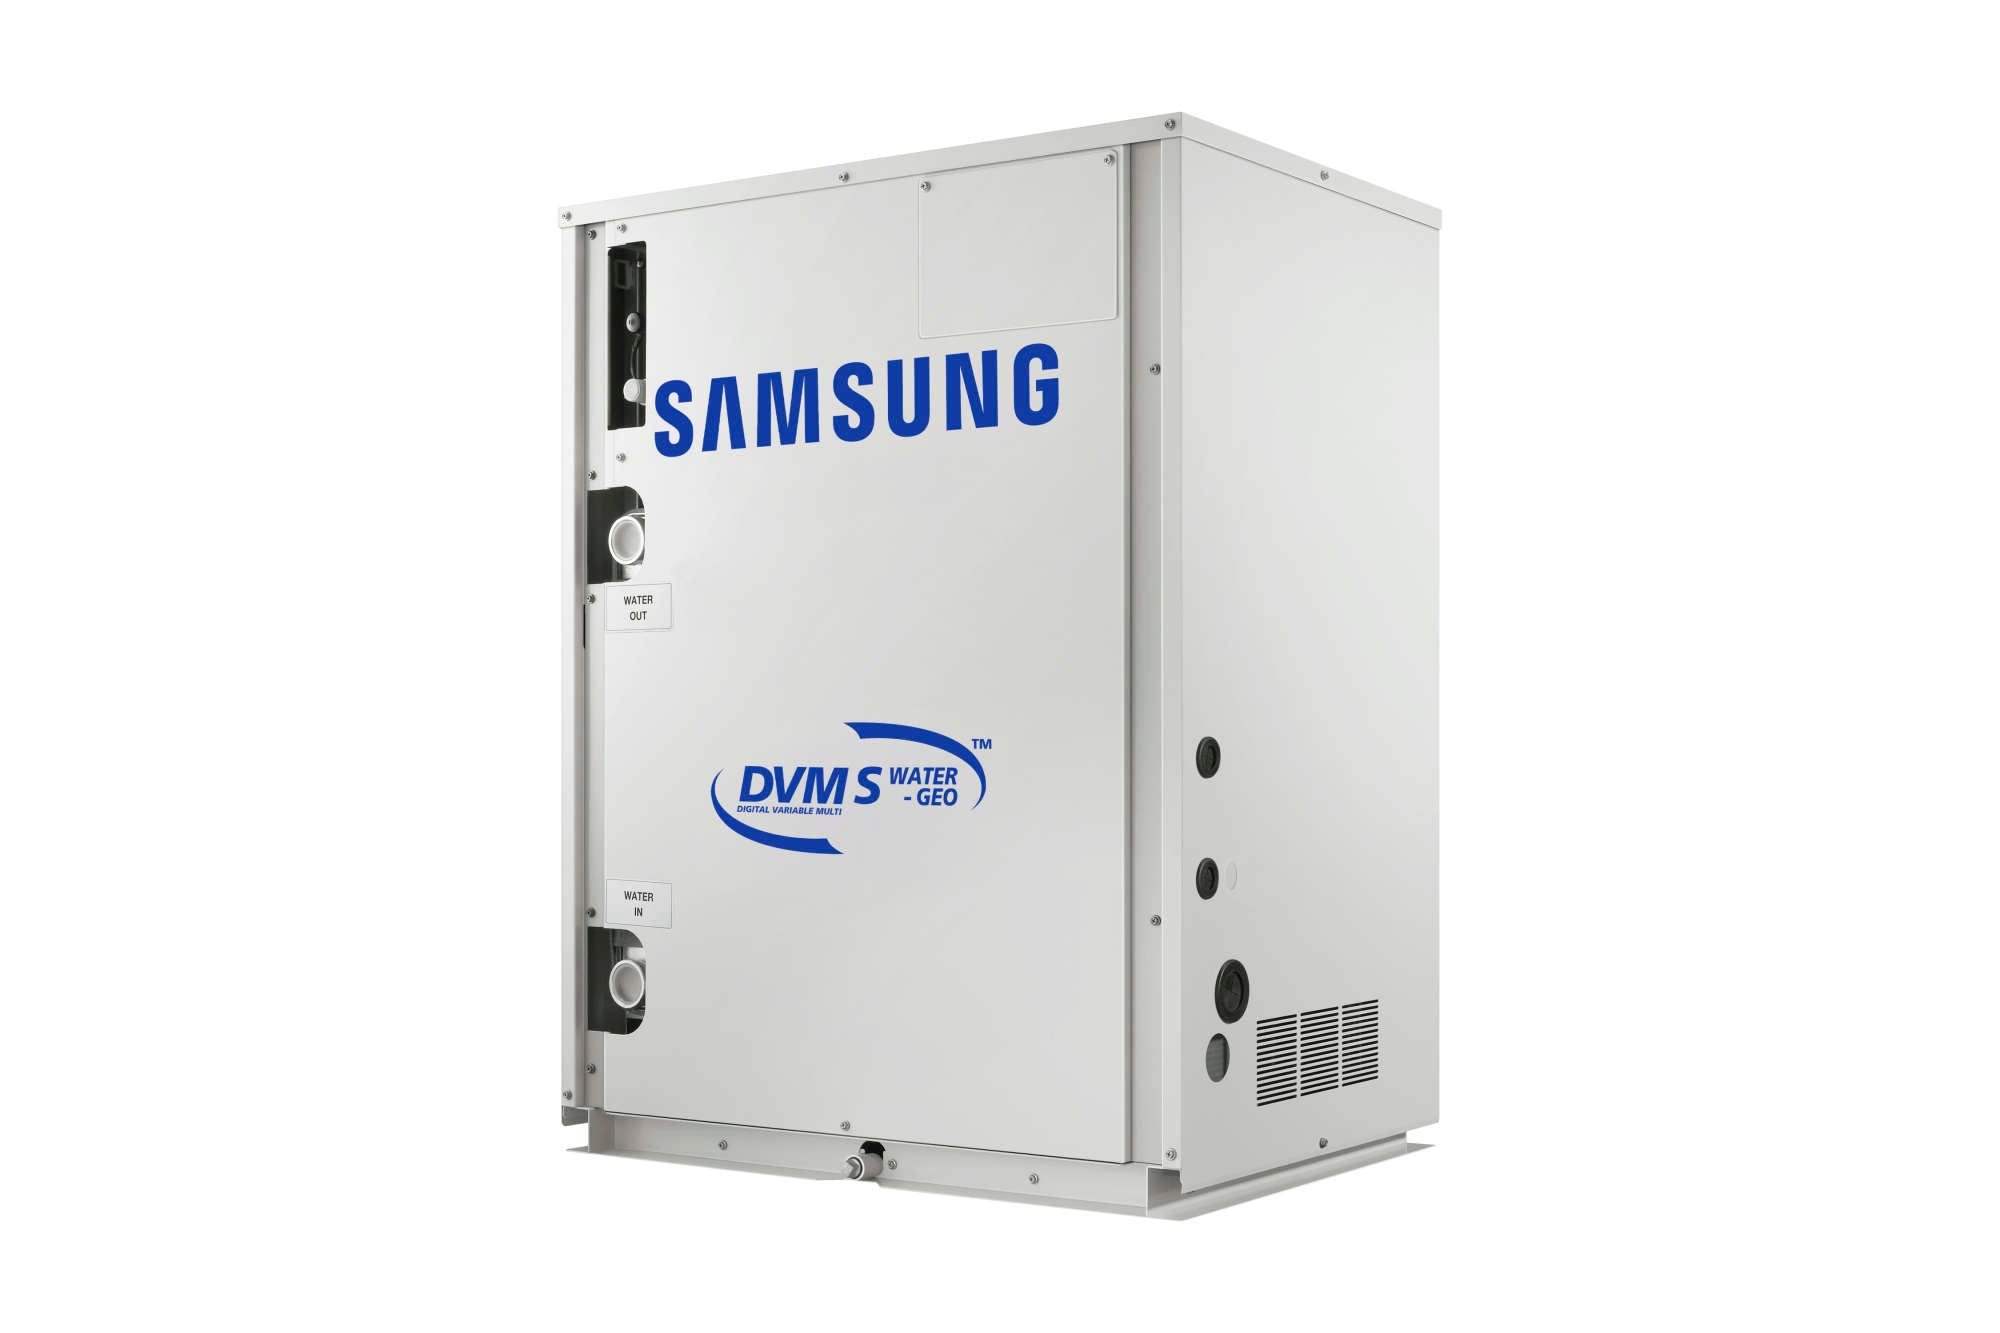 Samsung AM192HXWAFR/AA Air Conditioner DVM S WATER Air Conditioning System